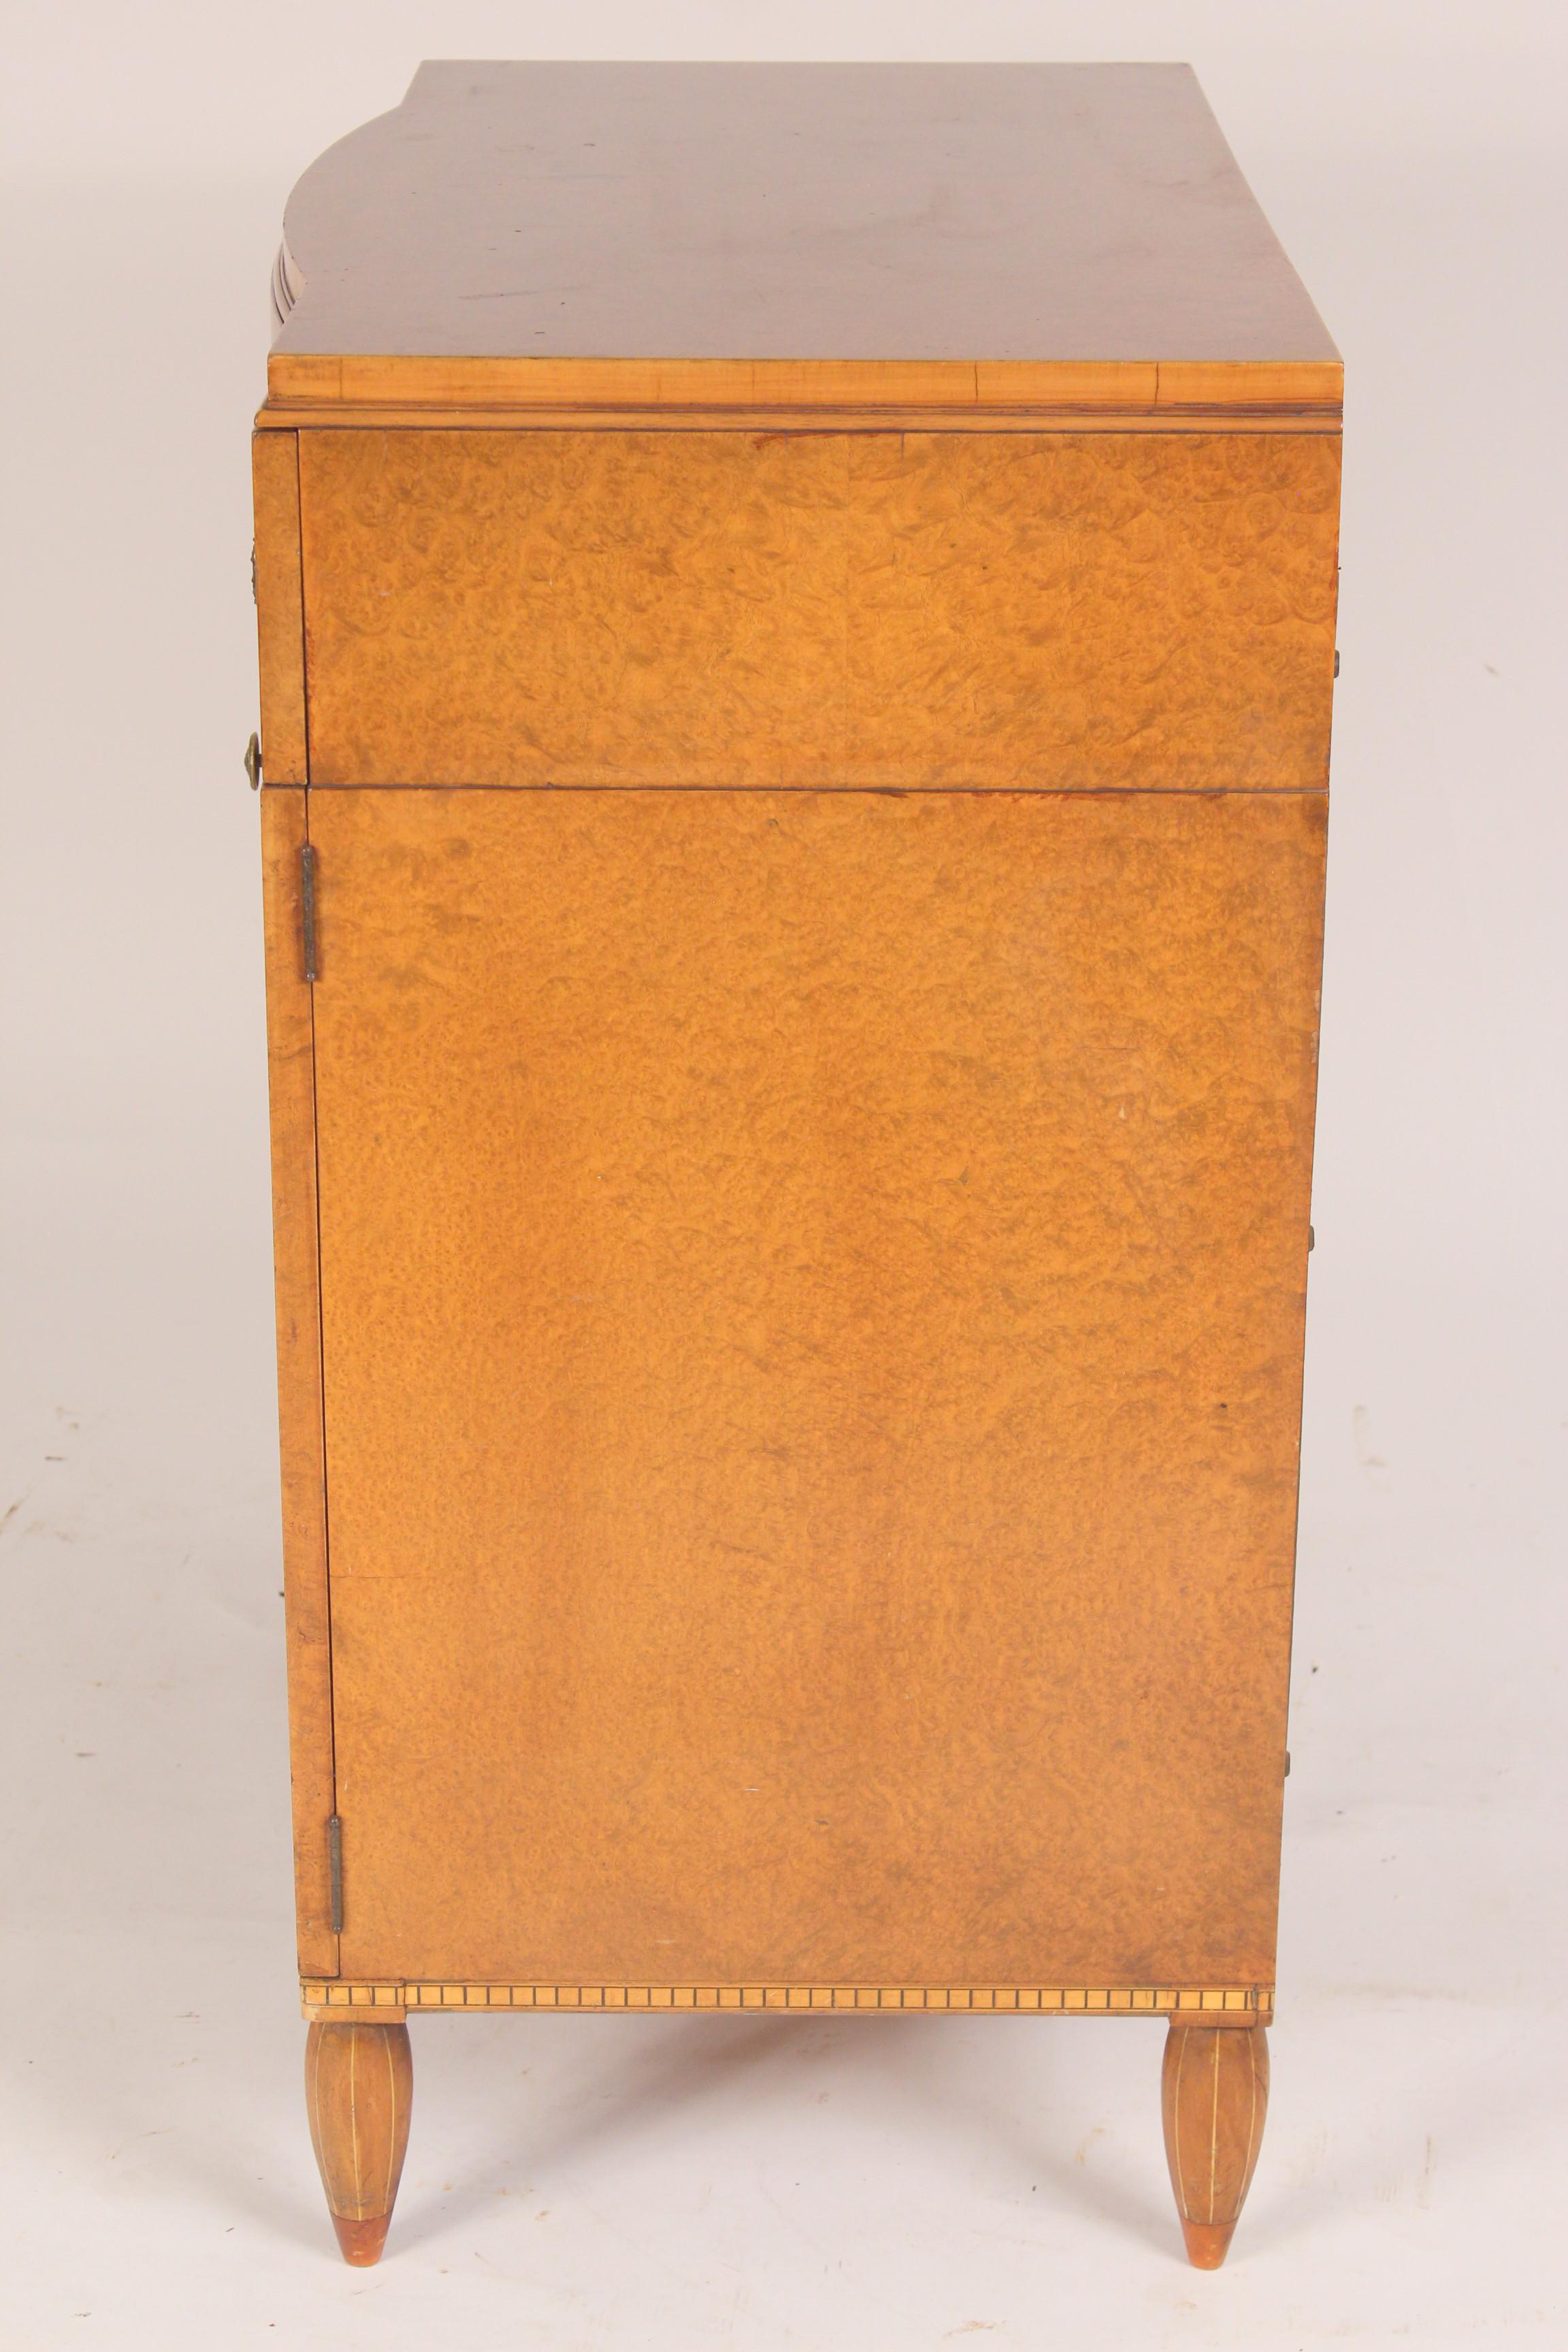 North American Art Moderne Burled Ash Cabinet / Chest of Drawers